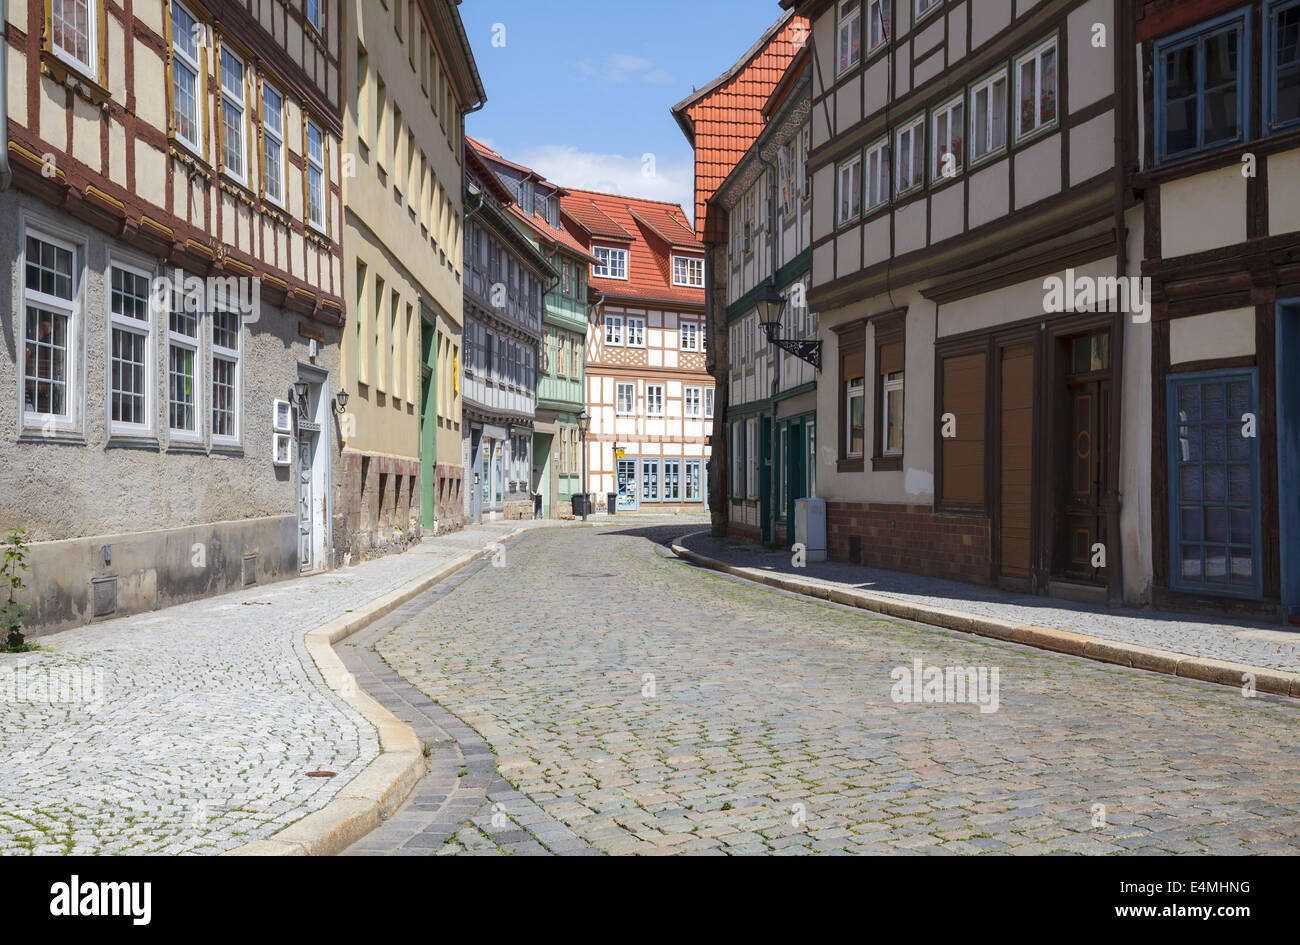 Bakenstrasse, a typical street in the Old Town with renovated timber frame houses, Halberstadt, Saxony Anhalt, Germany Stock Photo